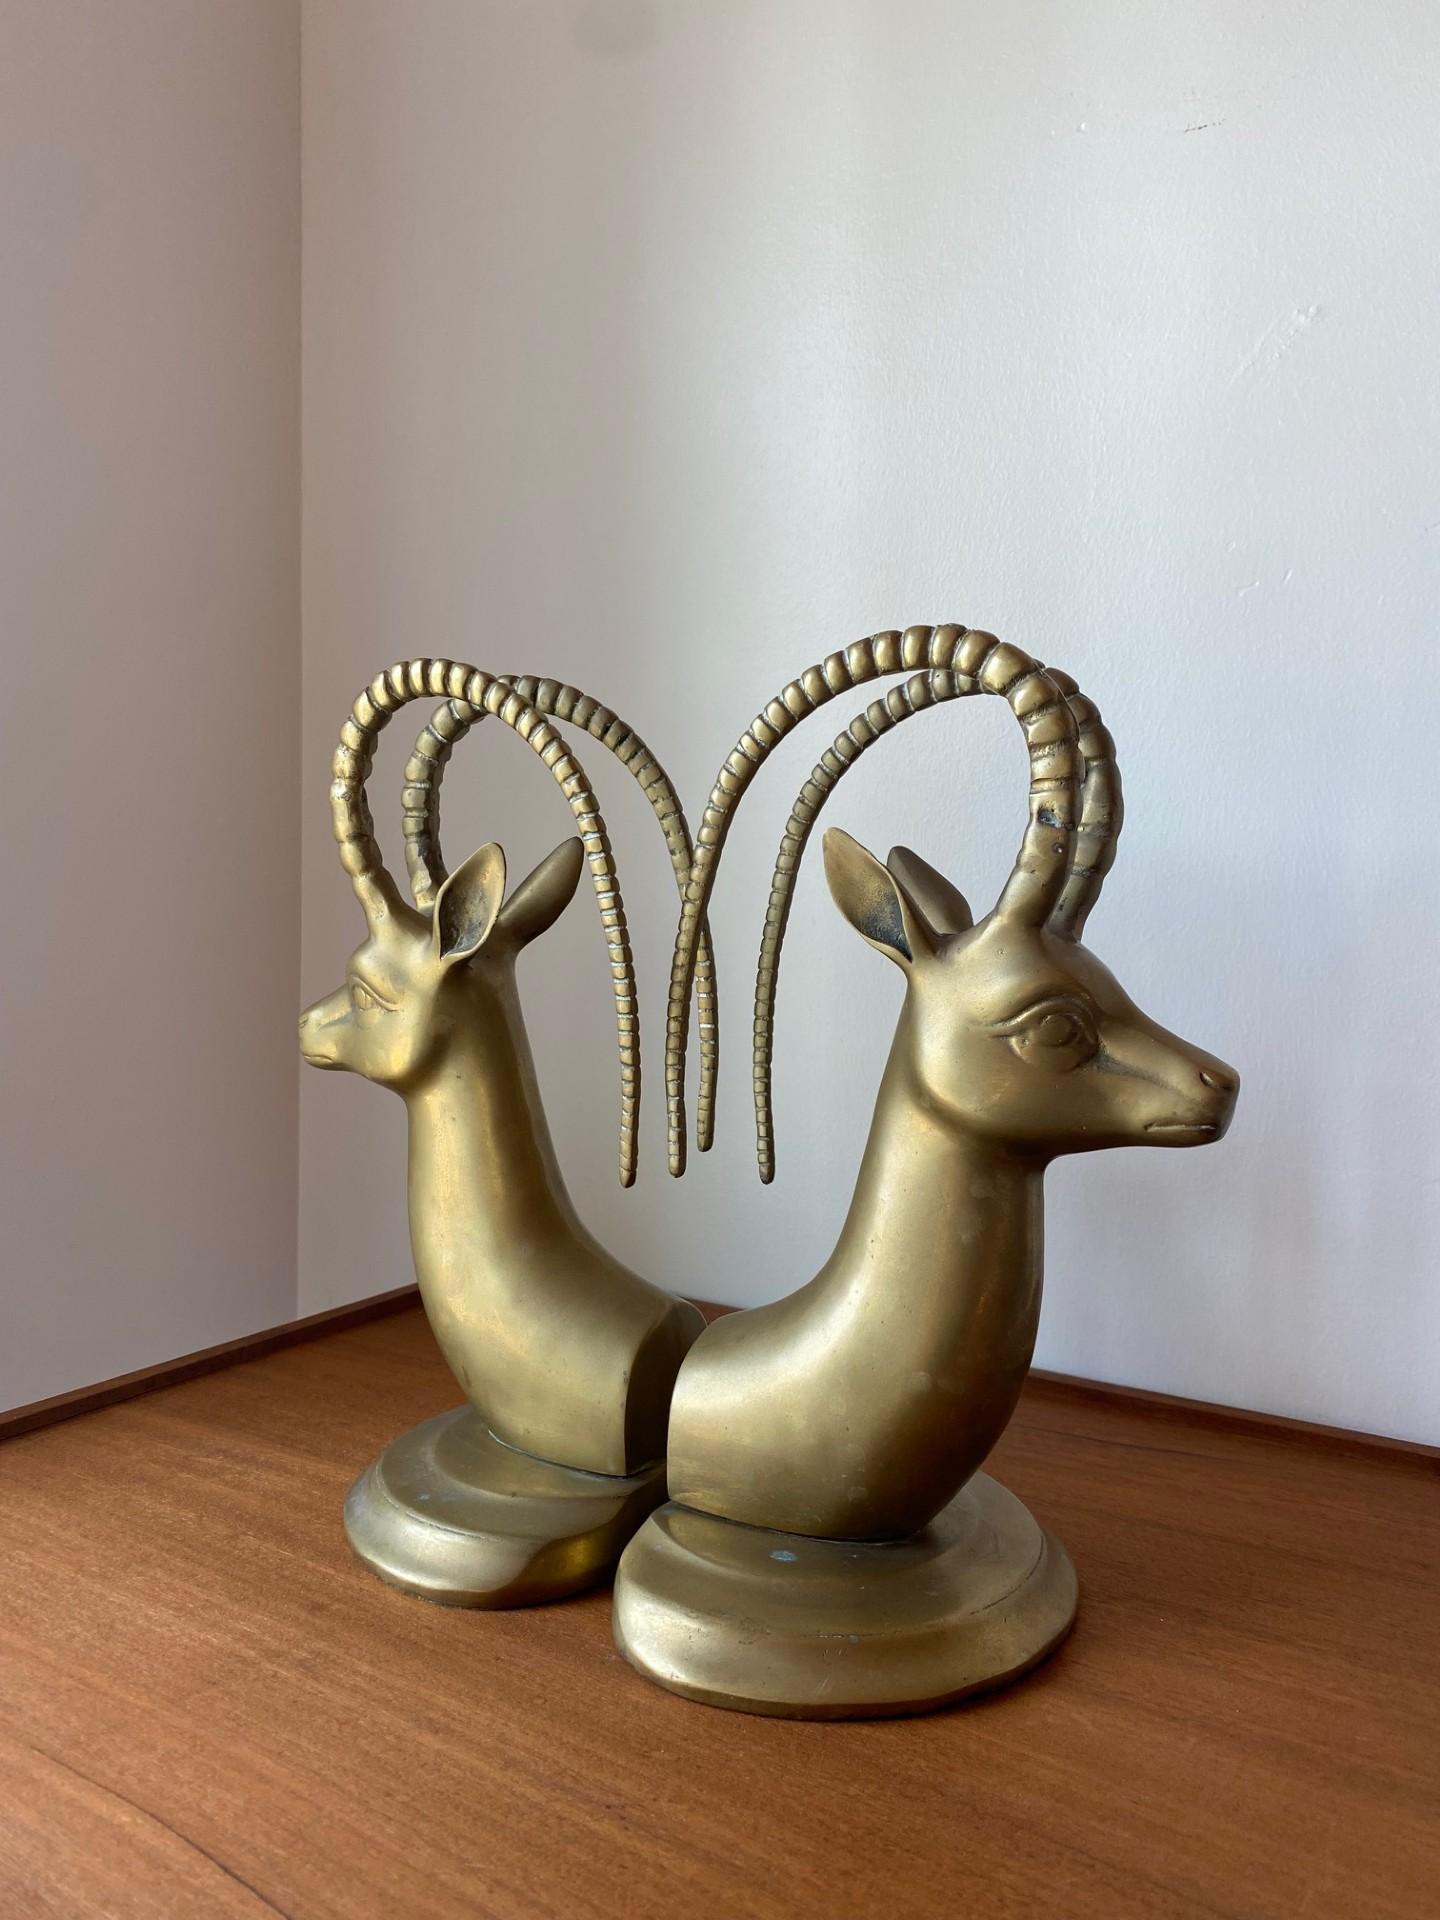 Striking pair of vintage brass Ibex head bookends with beautiful patina. The sheer commanding size of these piece catapult them to sculptures aside from their bookend use. The details on the figures evoke elegance and nostalgia. Perfect for your Mid